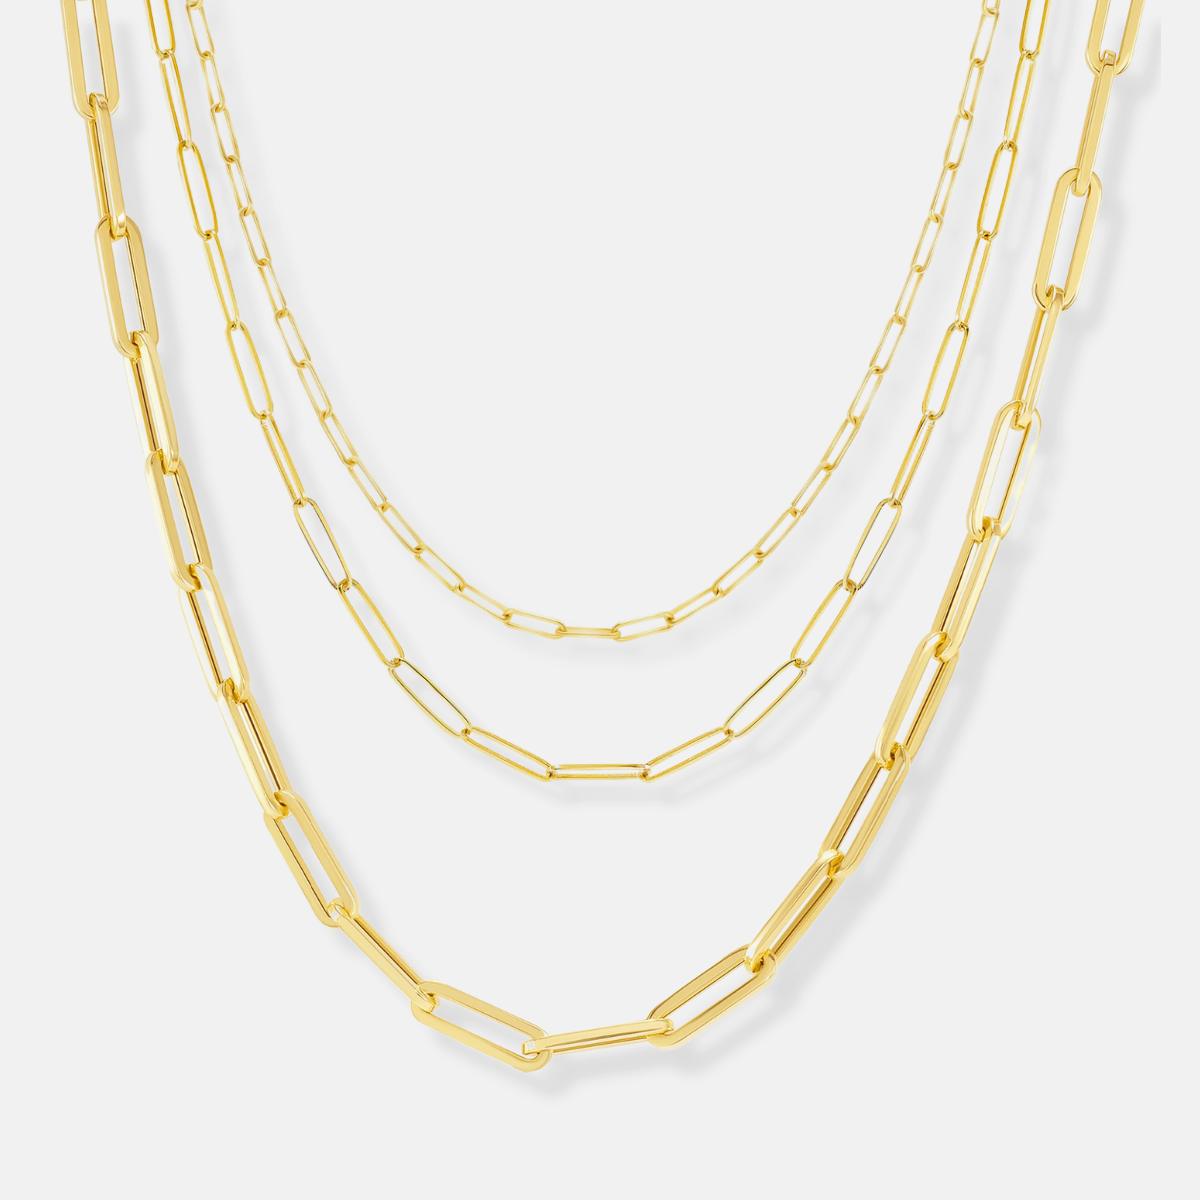 paperclip chain necklace - heavy medium and dainty weight